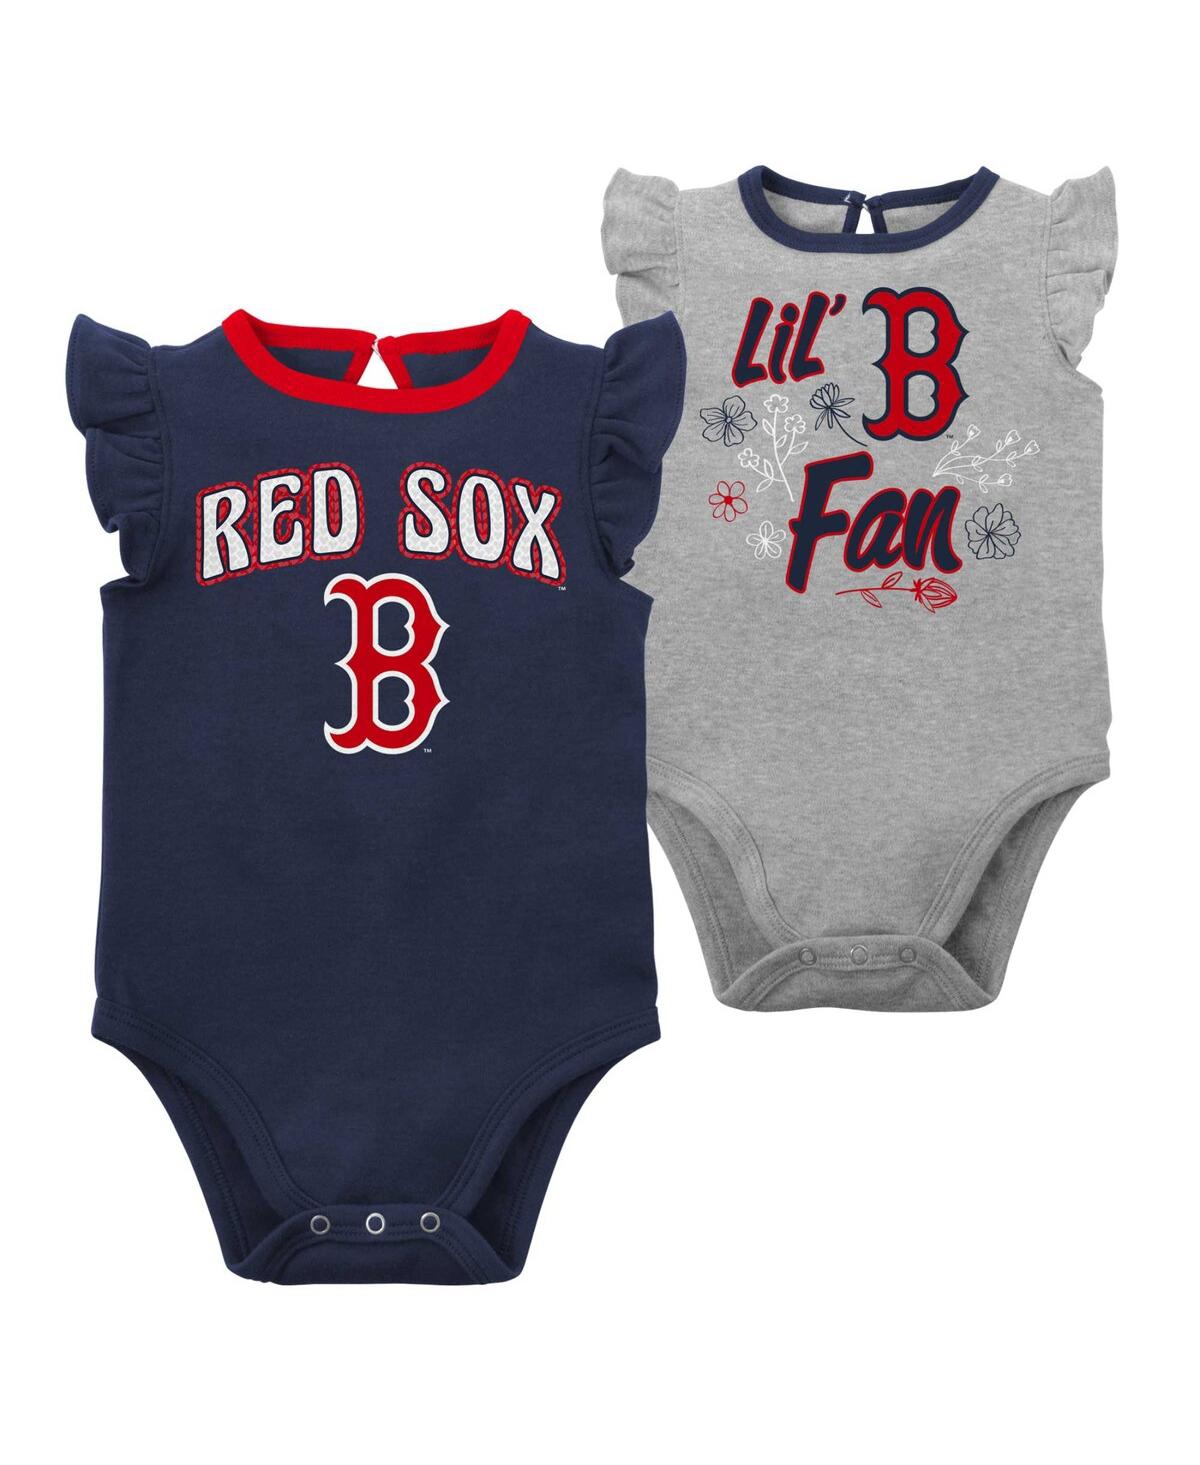 OUTERSTUFF INFANT BOYS AND GIRLS NAVY, HEATHER GRAY BOSTON RED SOX LITTLE FAN TWO-PACK BODYSUIT SET